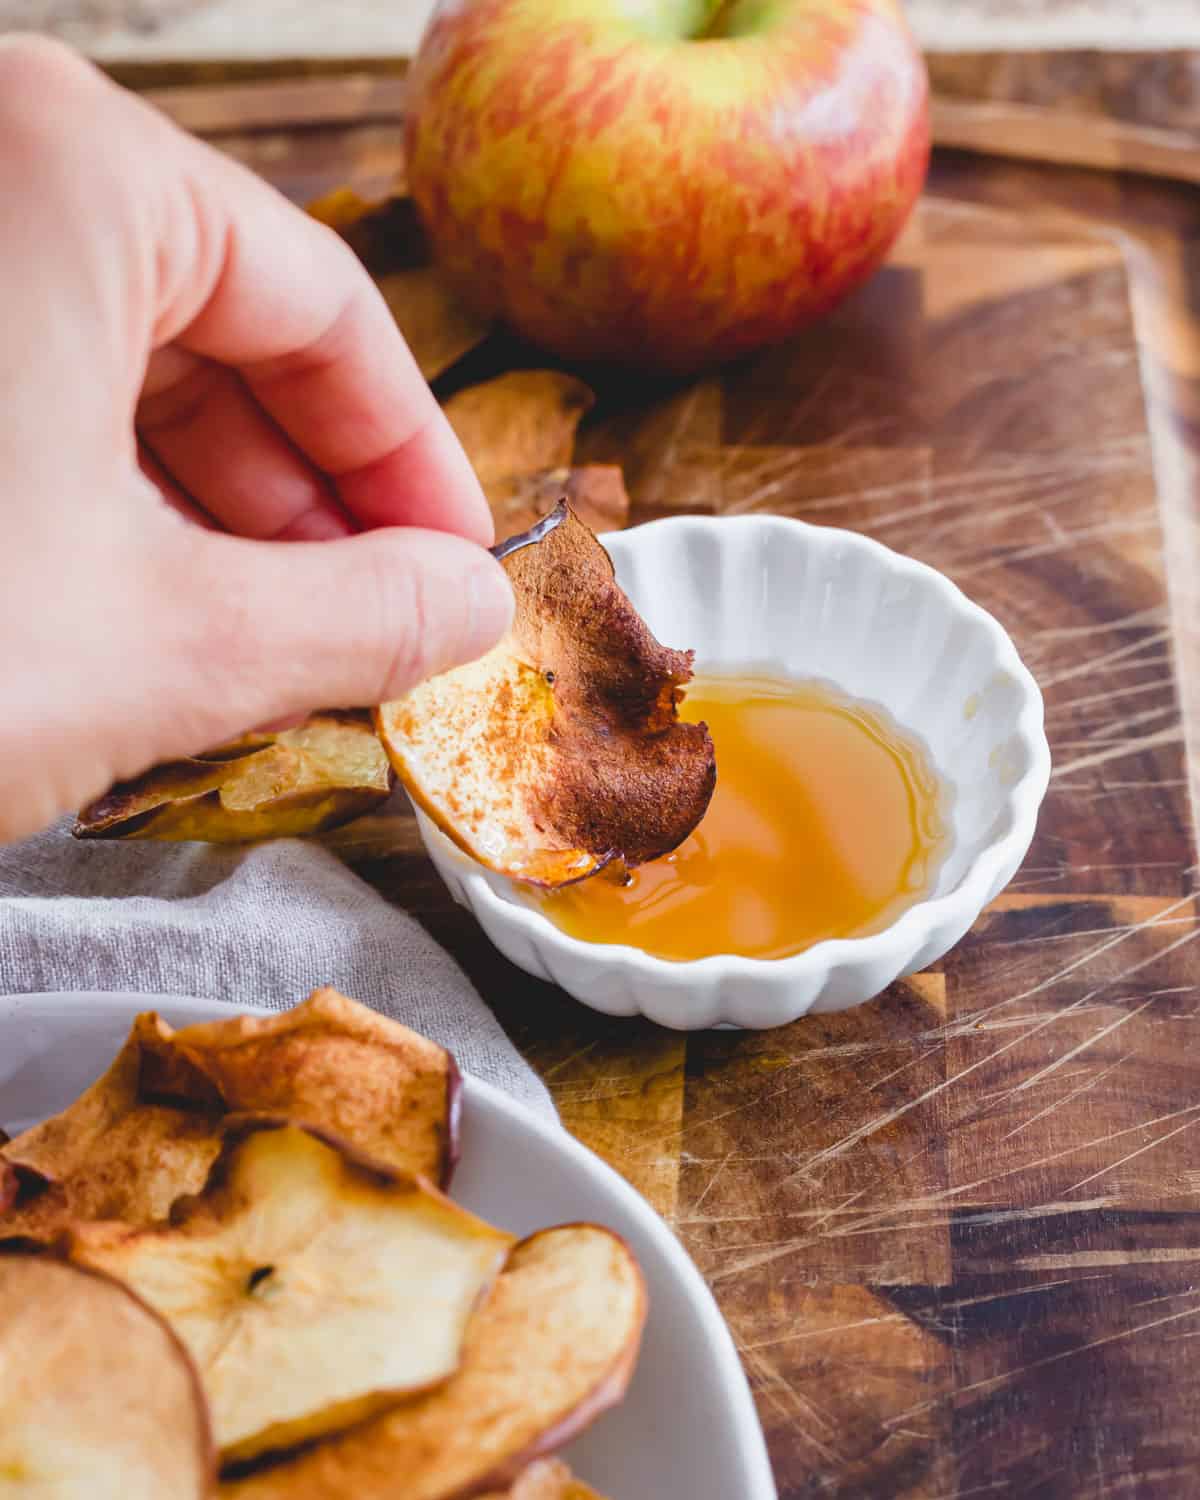 Cinnamon apple chip dipped in maple syrup.